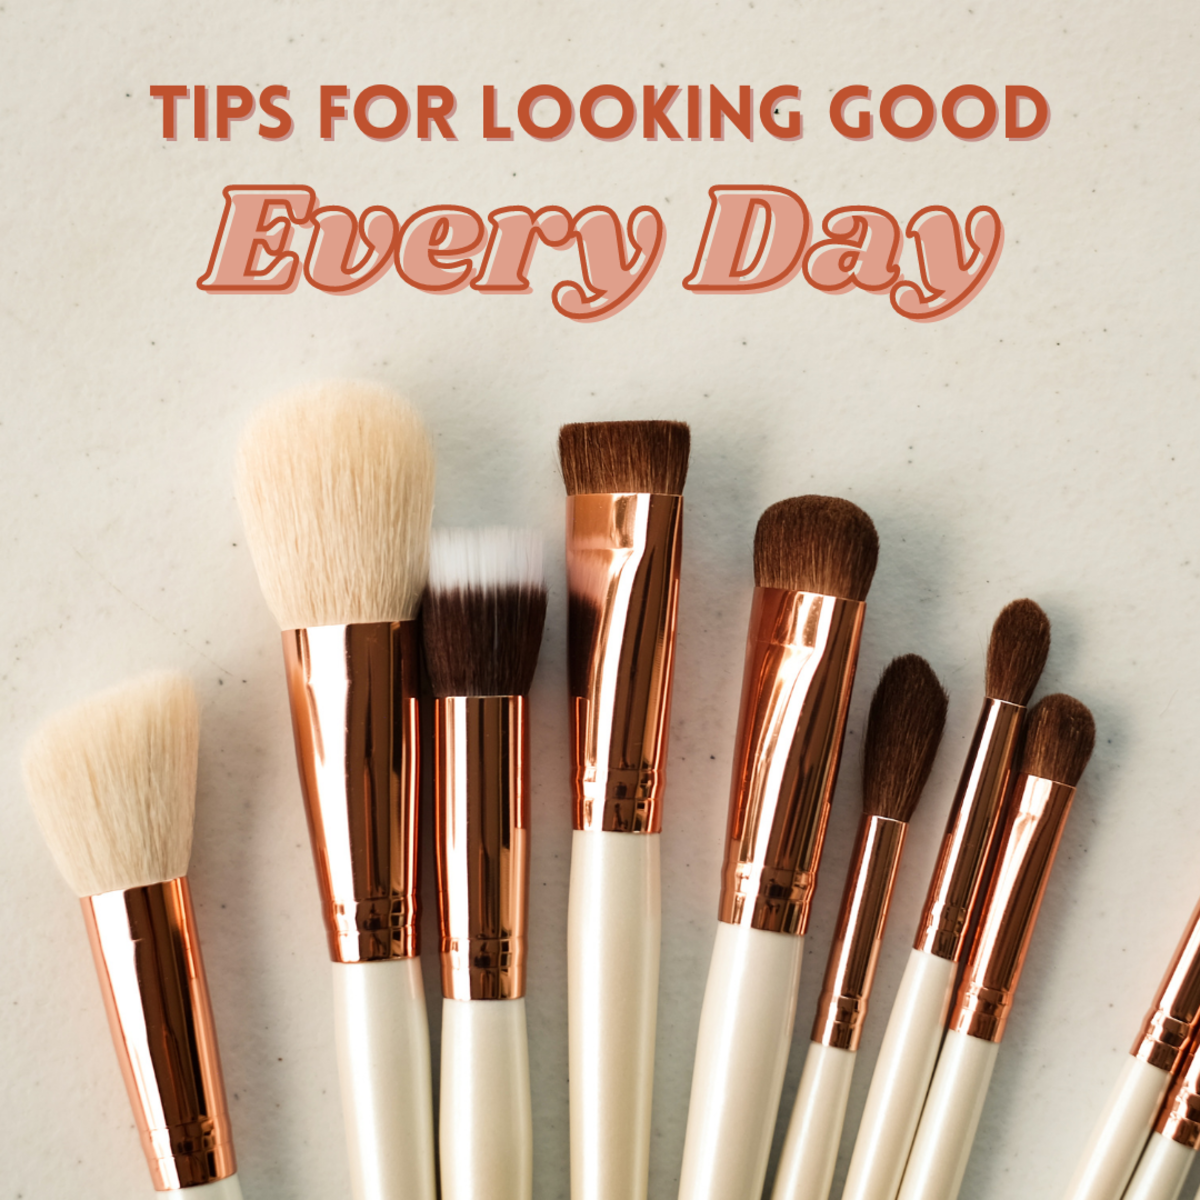 8 Simple Tips to Look Your Best Every Day